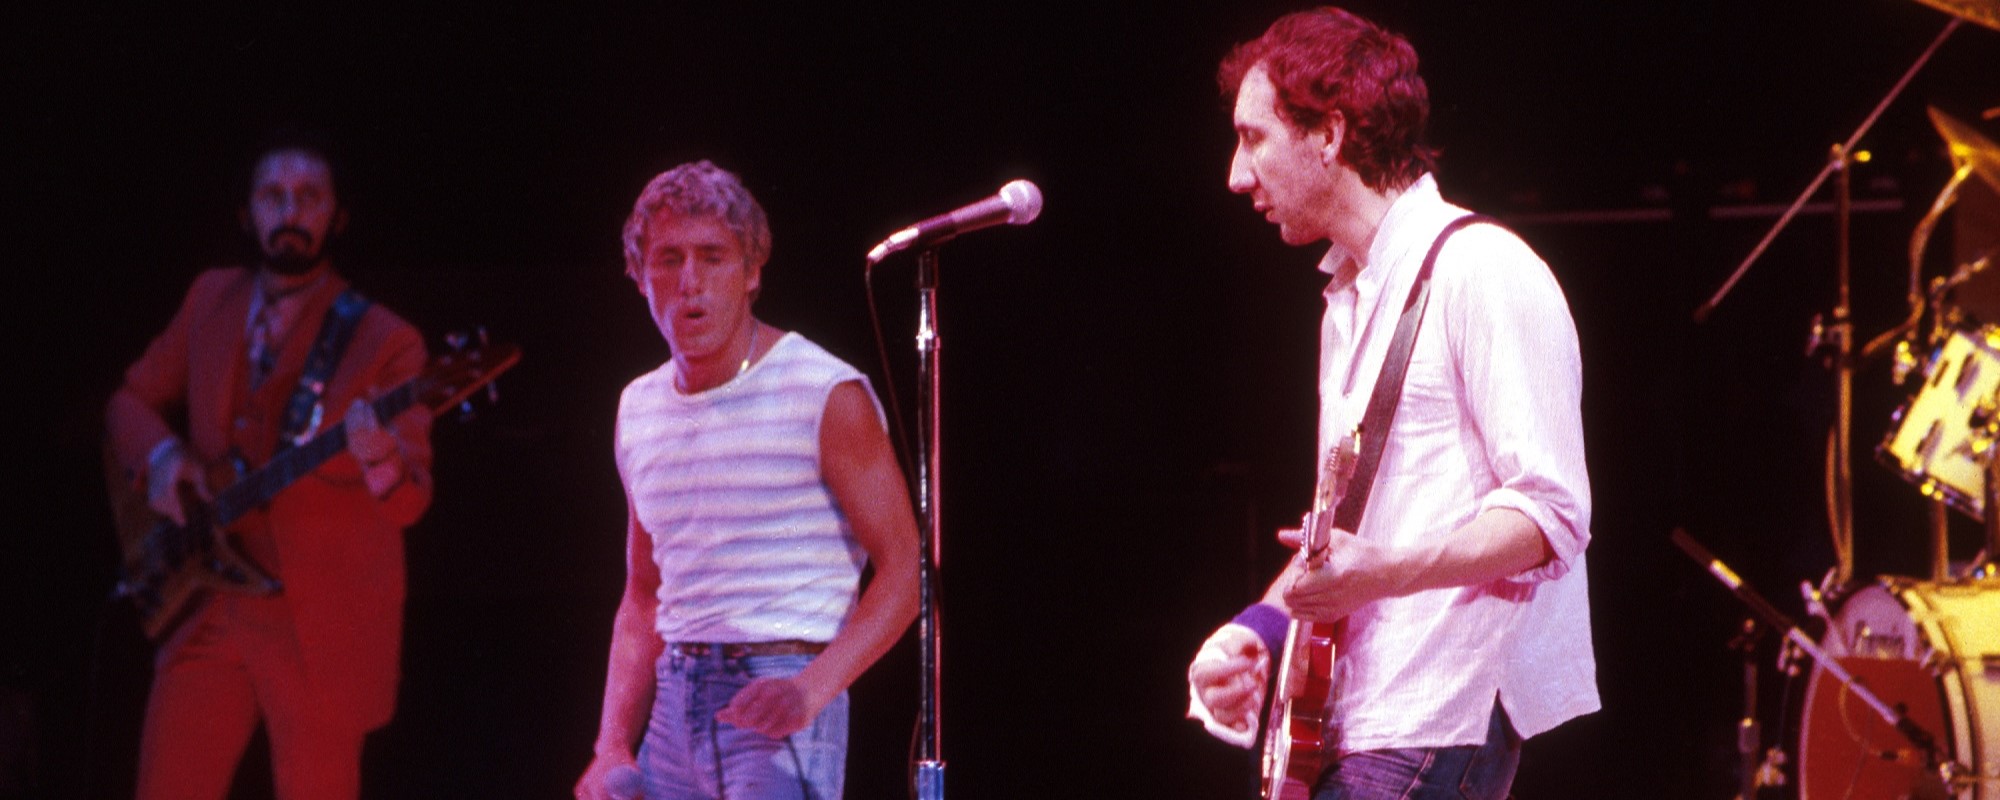 Behind the Song: About The Who’s Last Top 20 Hit, “You Better You Bet”